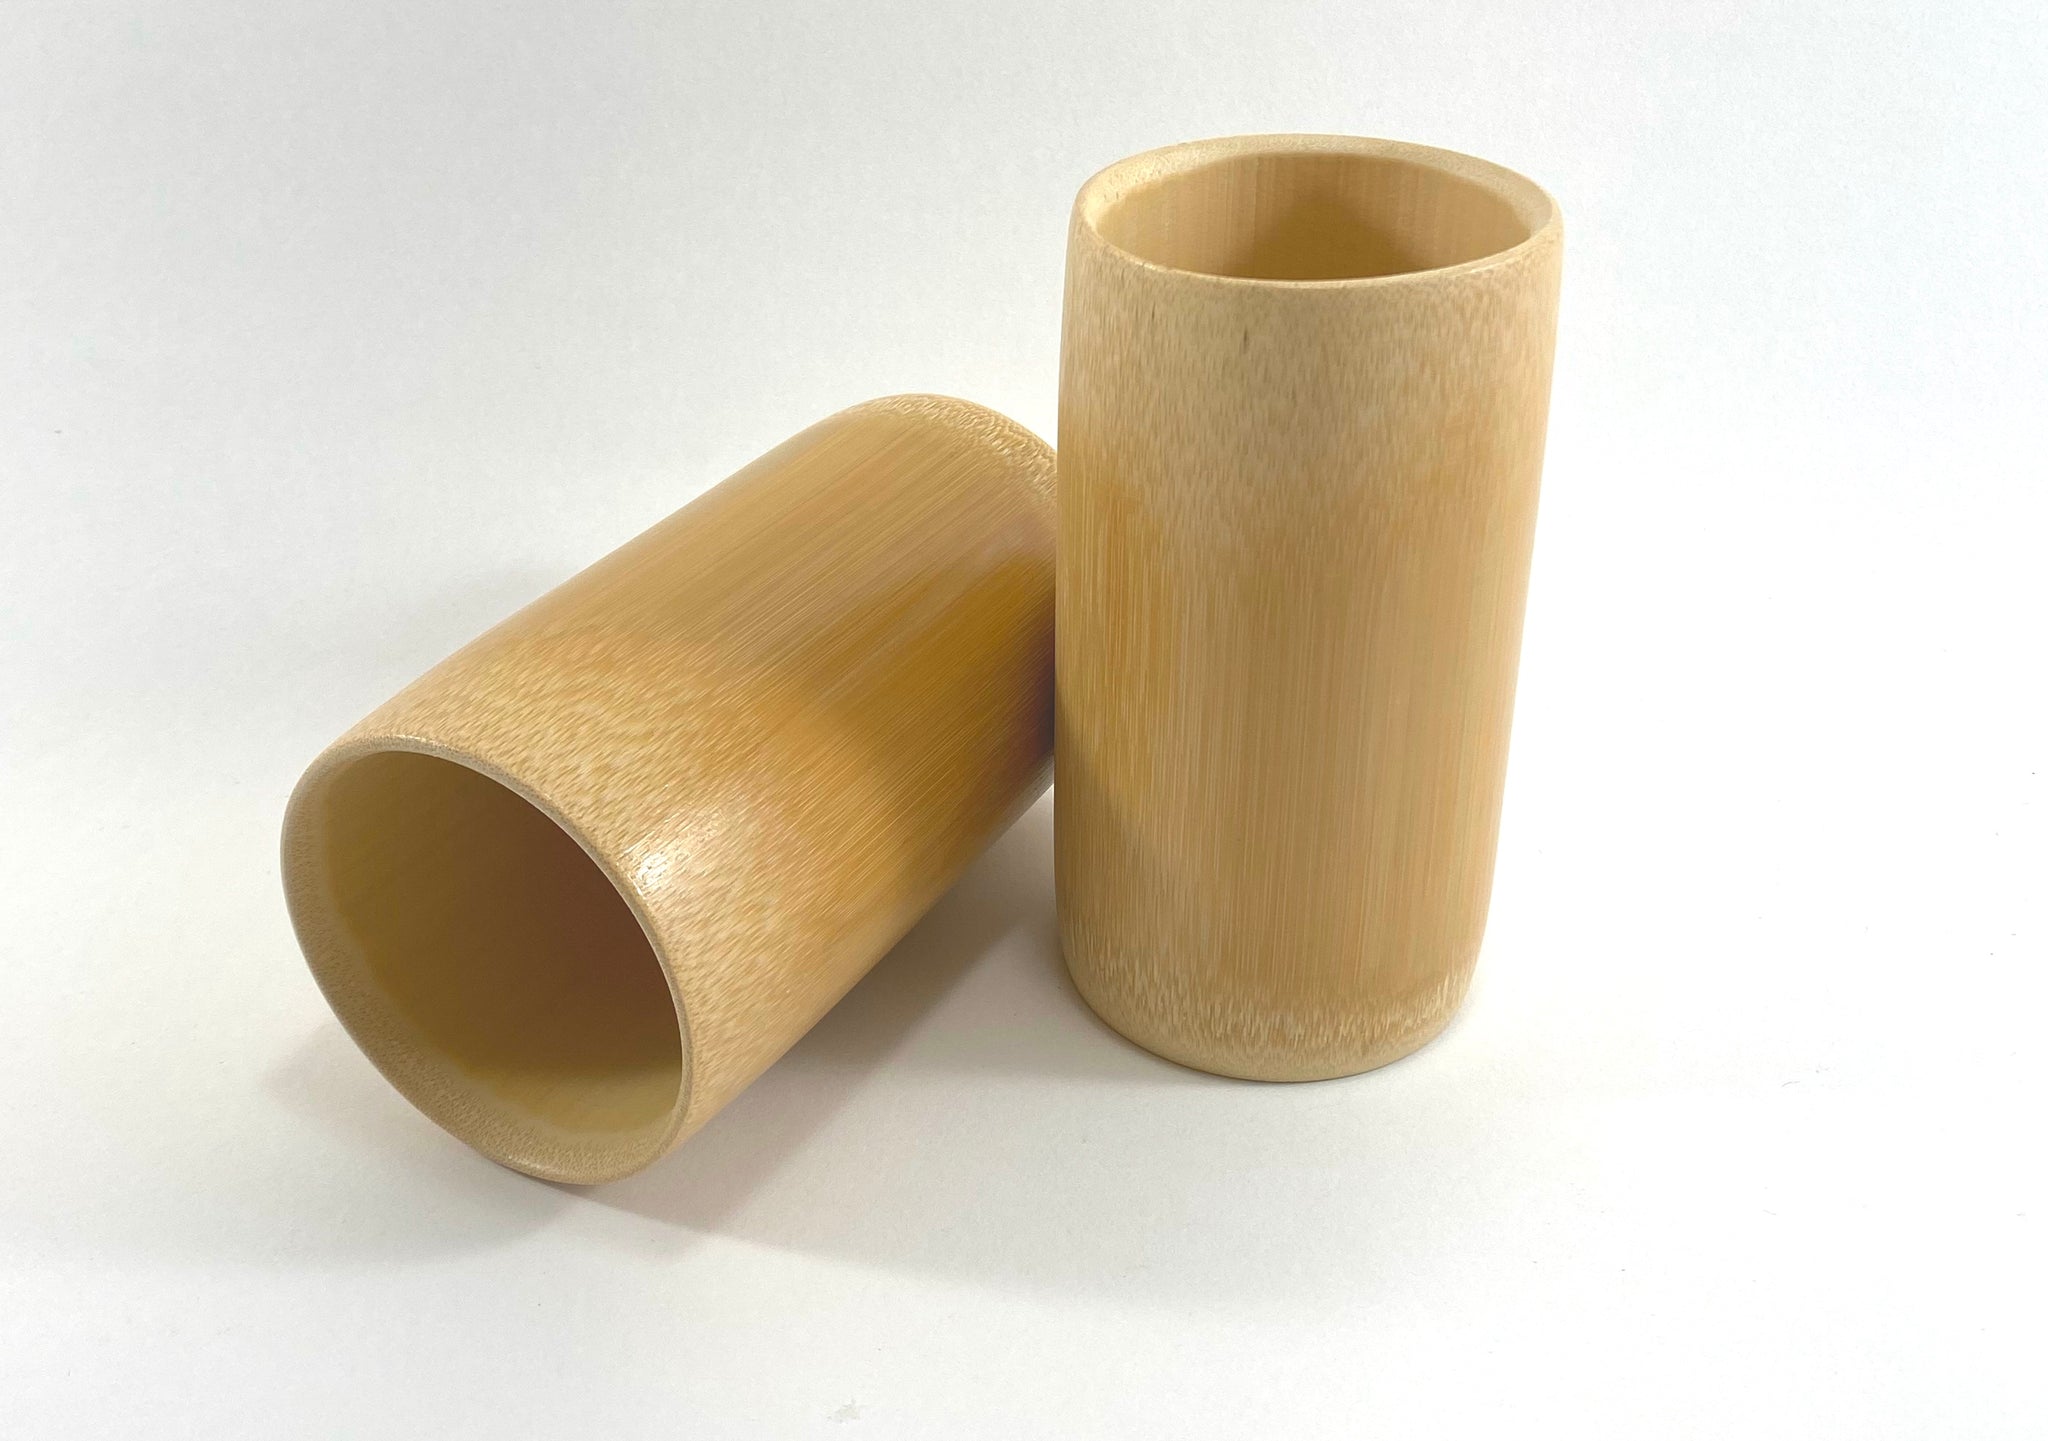 Vietnam organic bamboo cup for water, coffee and beer